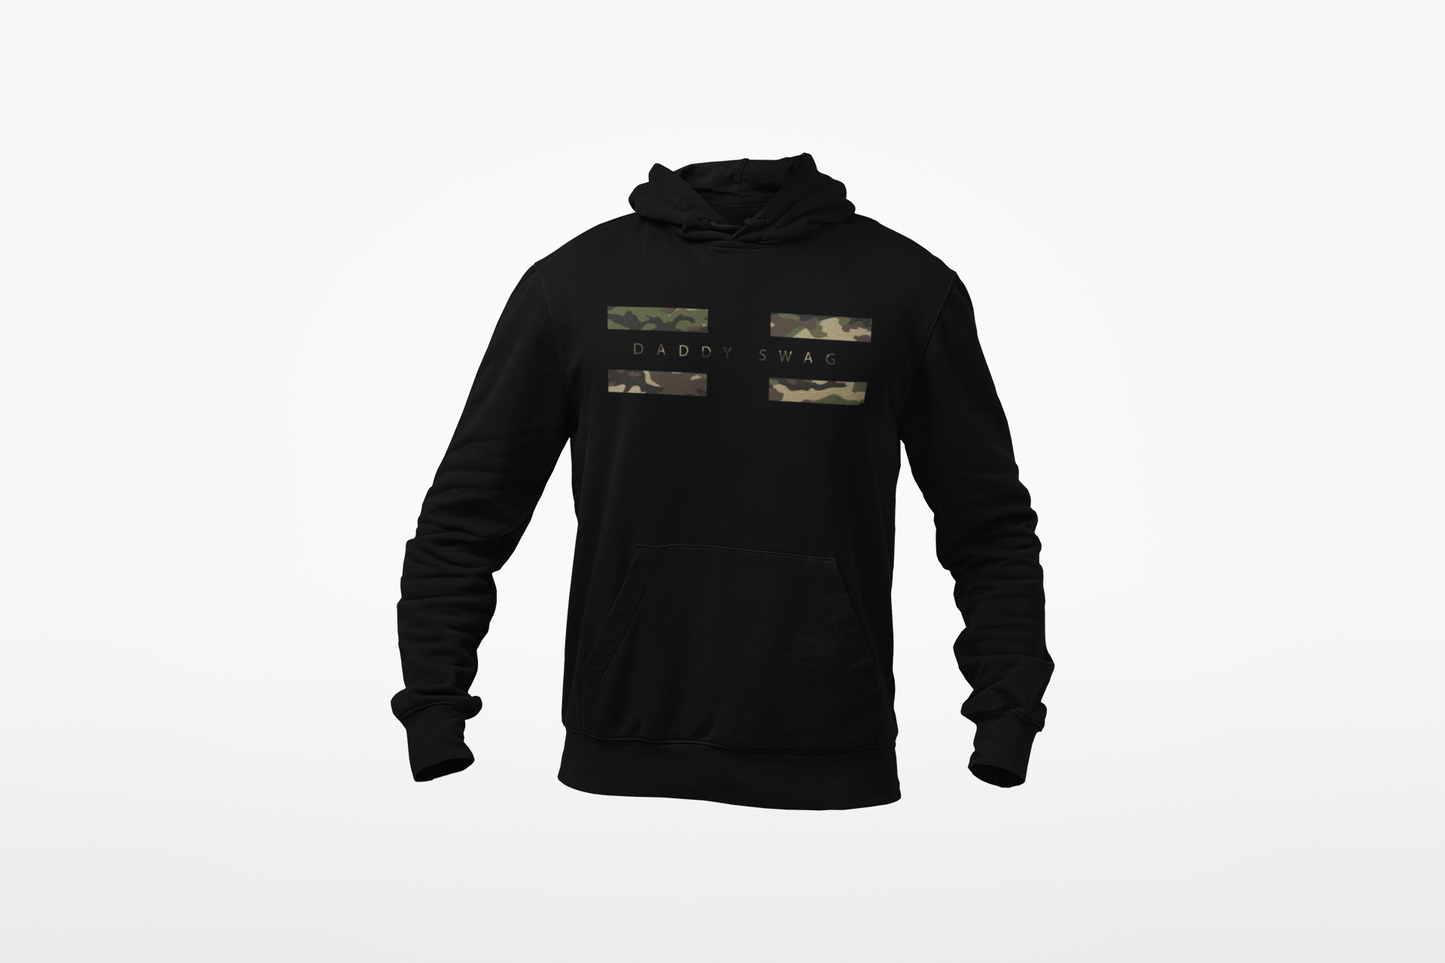 Daddy Swag Timeless Fatigue Hoodie